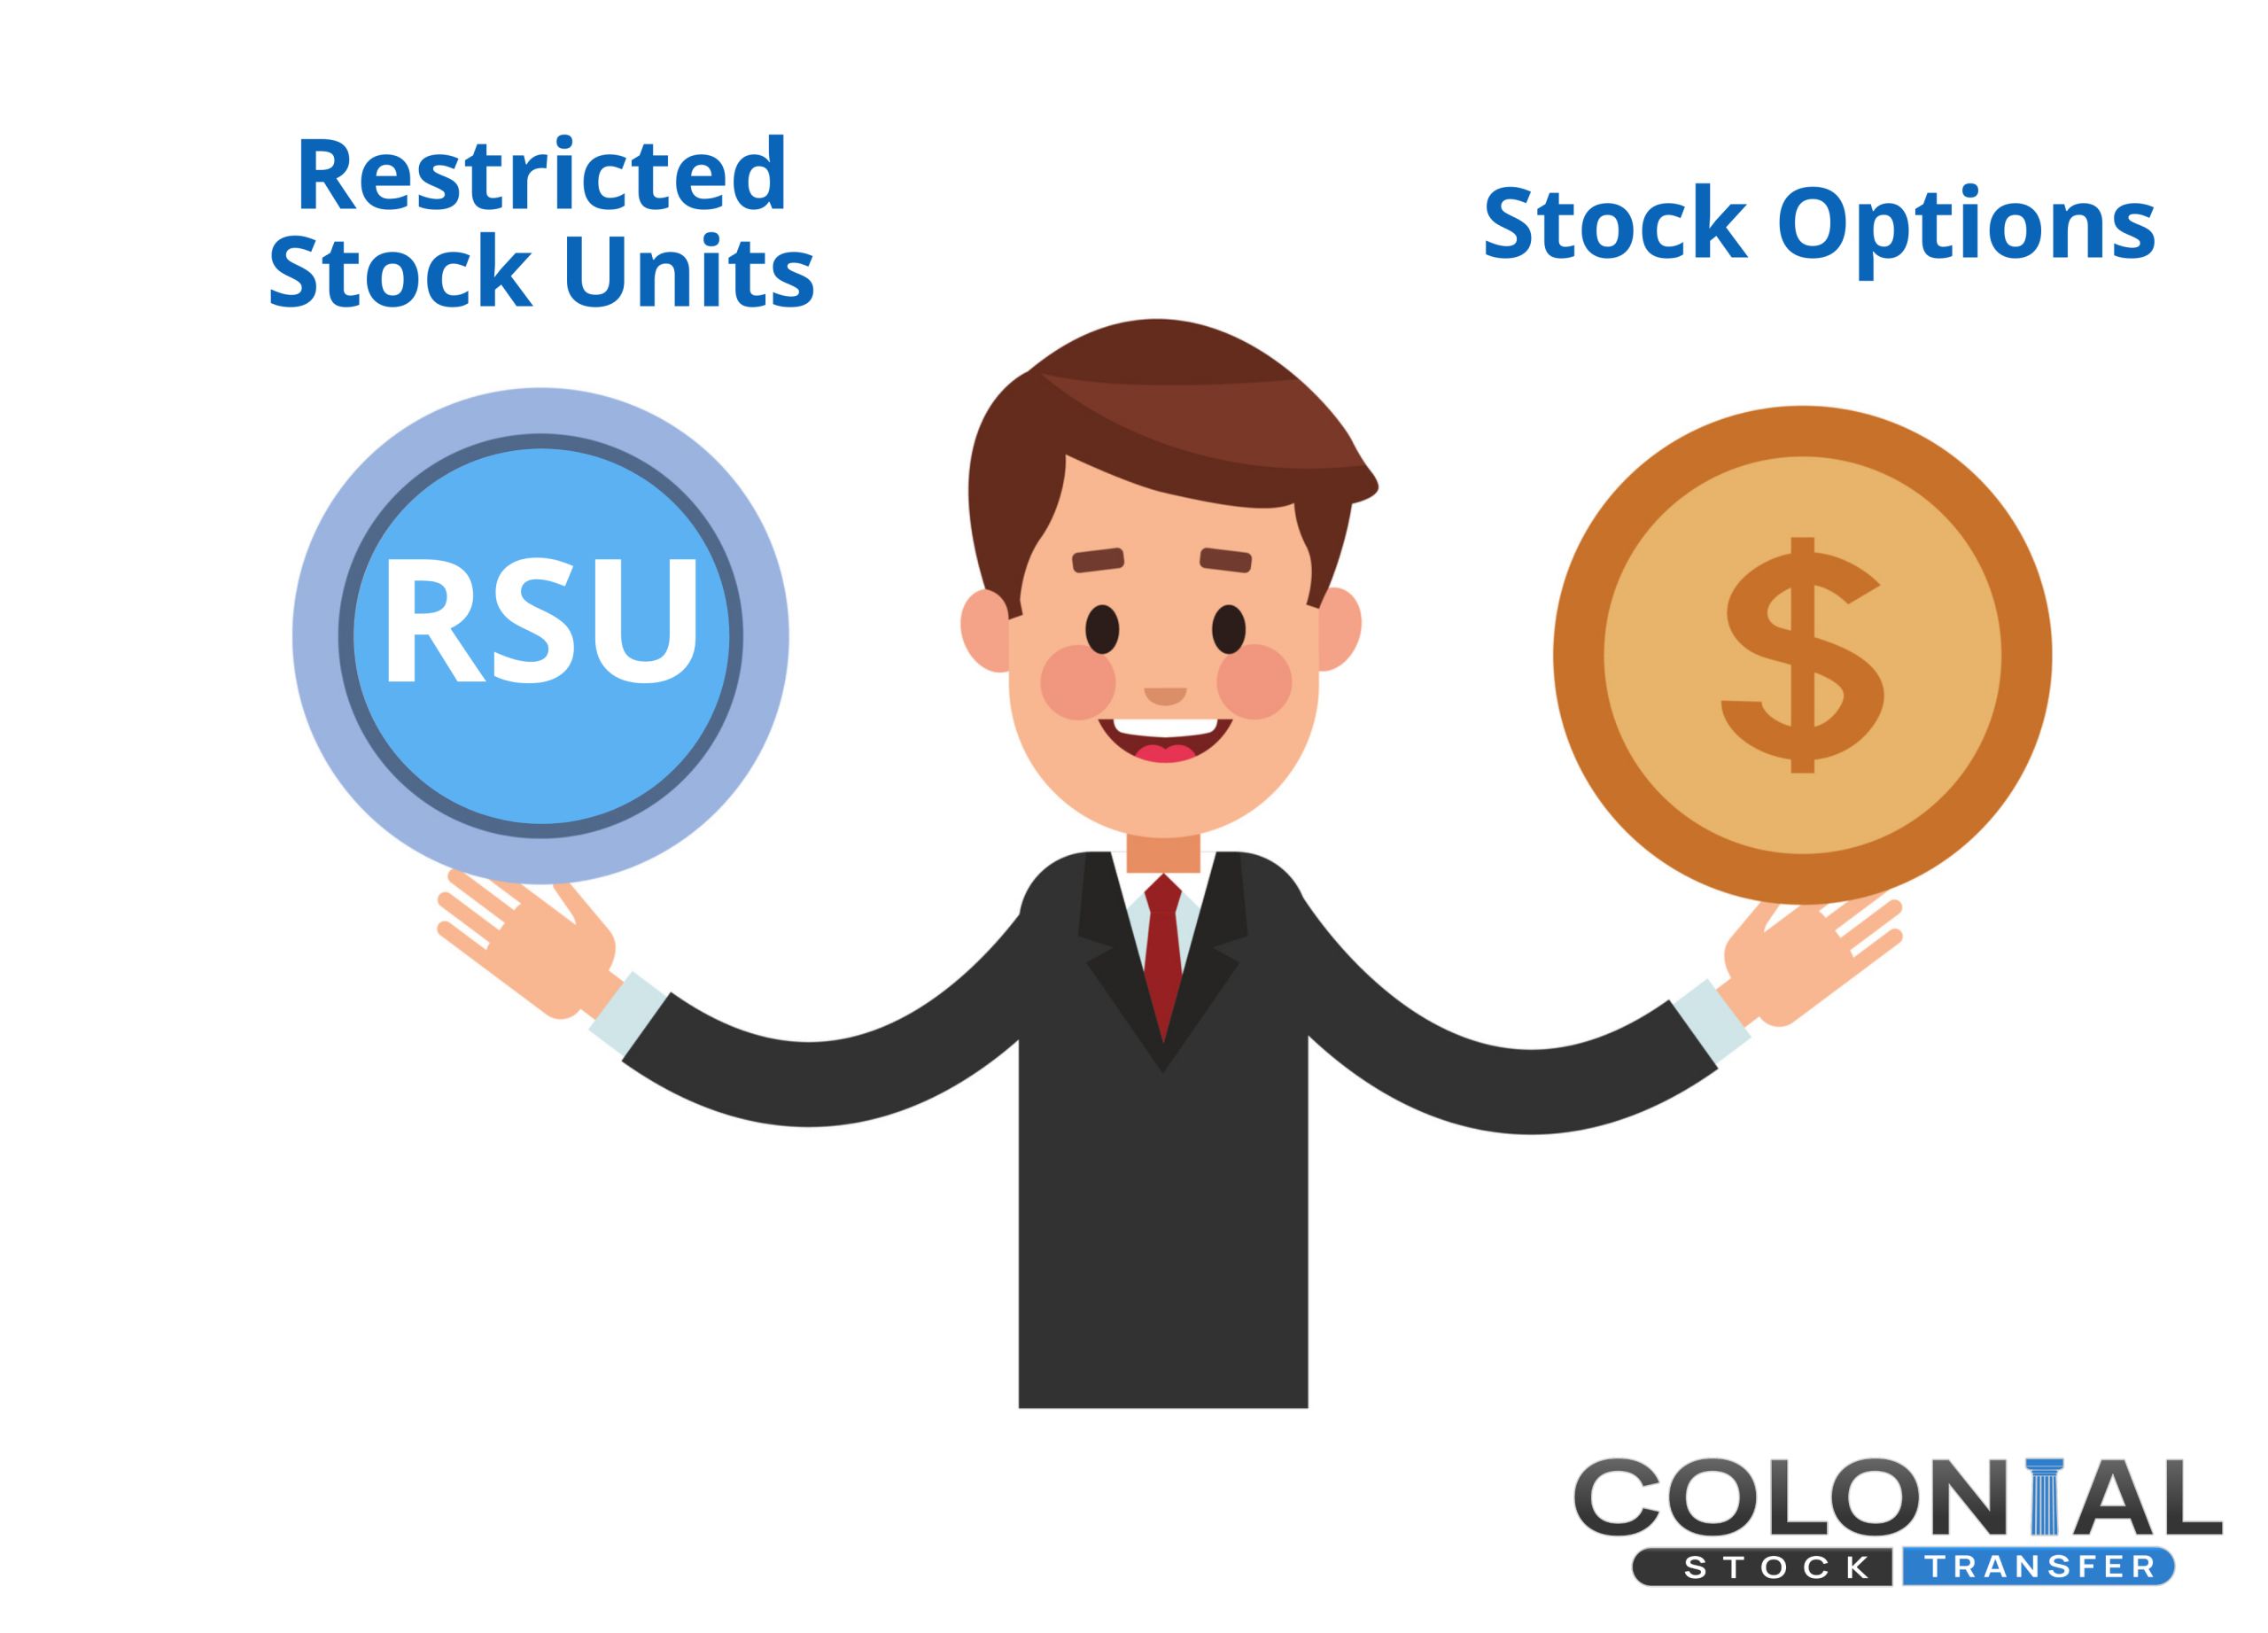 Restricted Stock Units vs. Stock Options